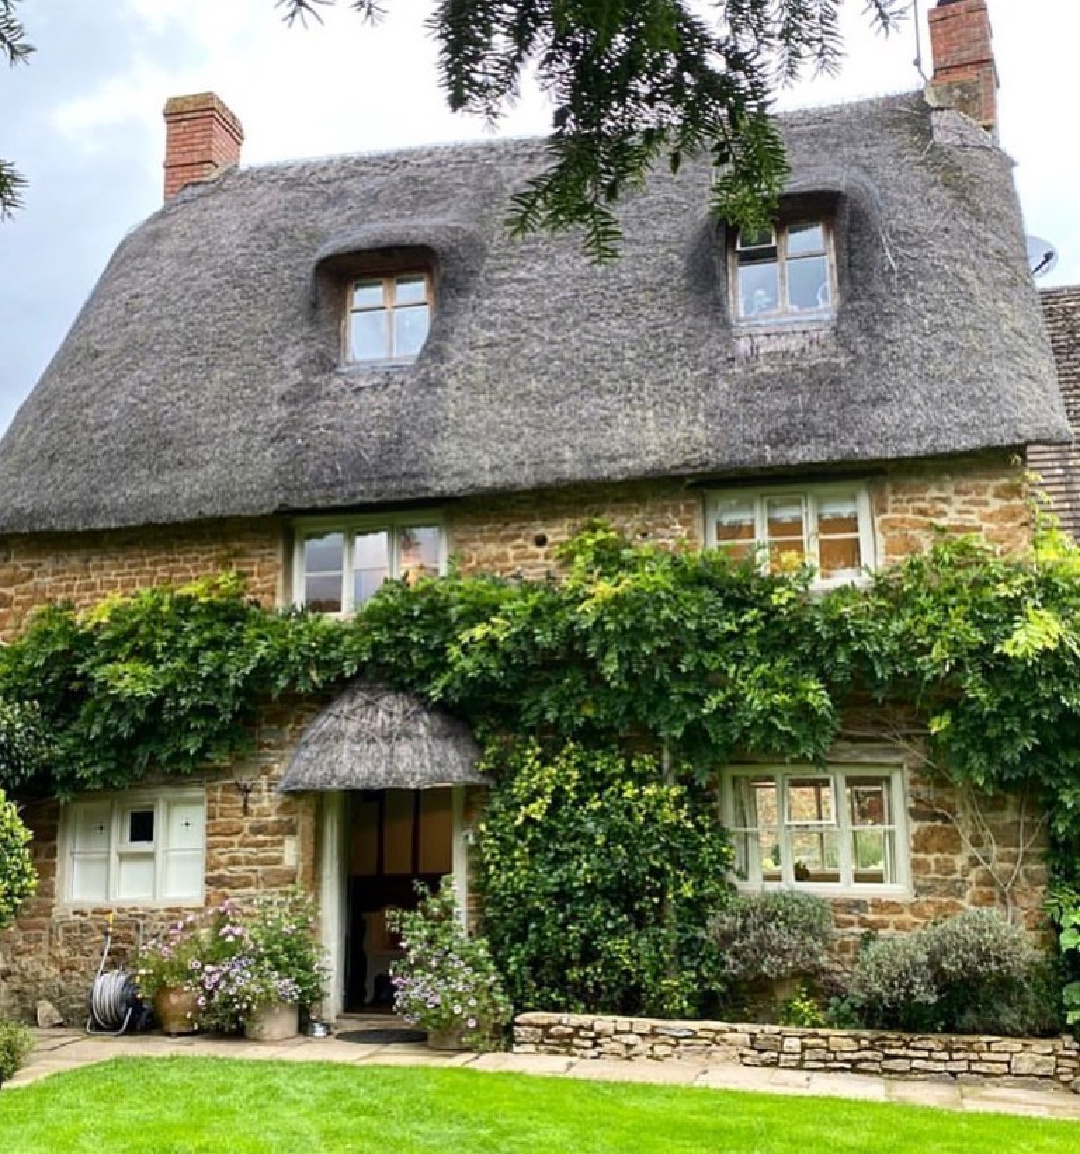 Thatched roof and stone exterior of a Cotswold cottage via @melanieturnerinteriors. #cotswoldcottage